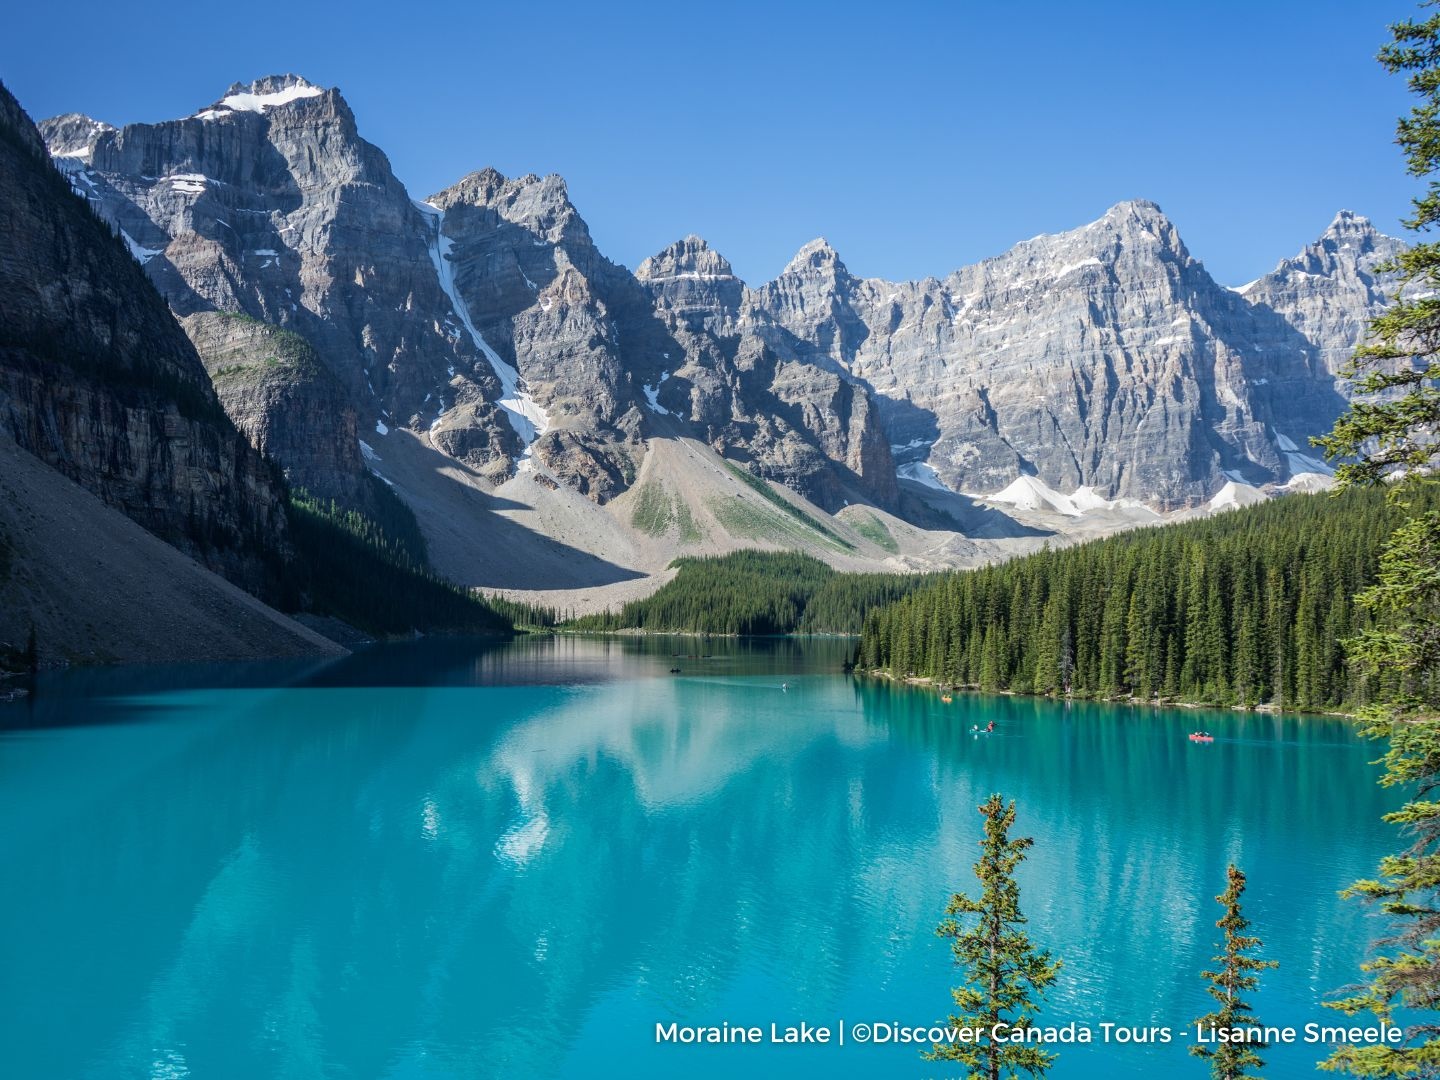 5-Day Rockies Summer Premium Tour from Vancouver: Blue River, Banff and Revelstoke